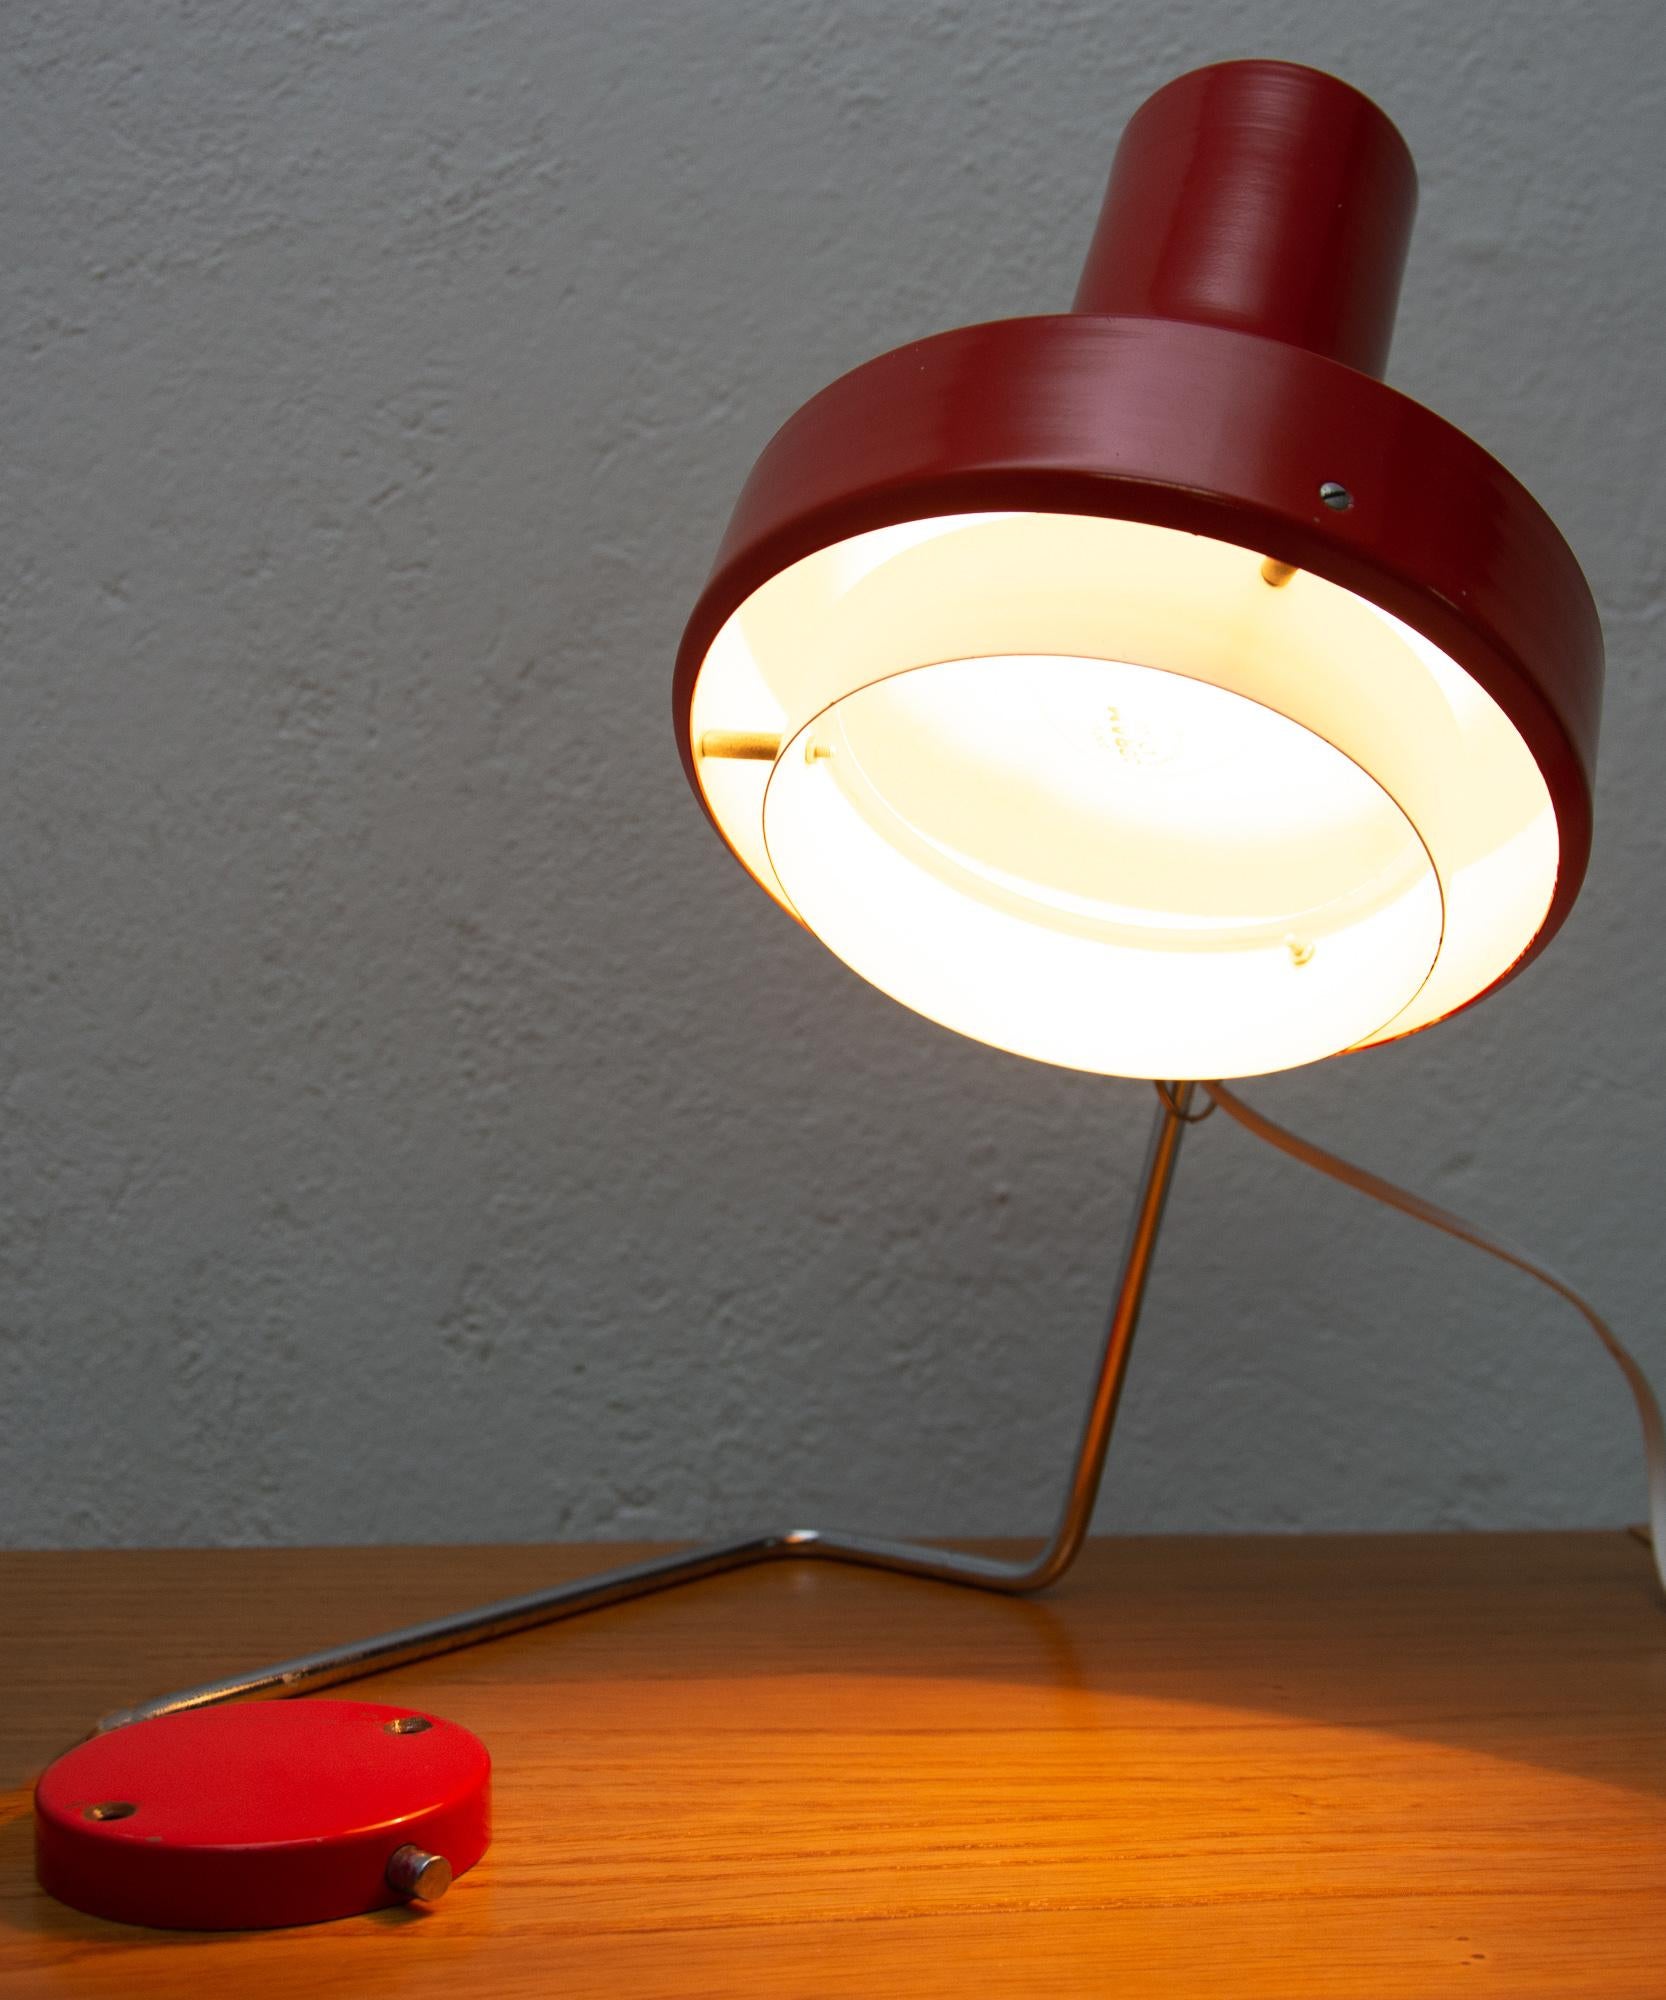 This wall or table lamp was designed by Josef Hurka in the 1960s. Shade is made of aluminium, rest is made of painted and chromed steel. Lamp uses one E27, max 100W bulb.